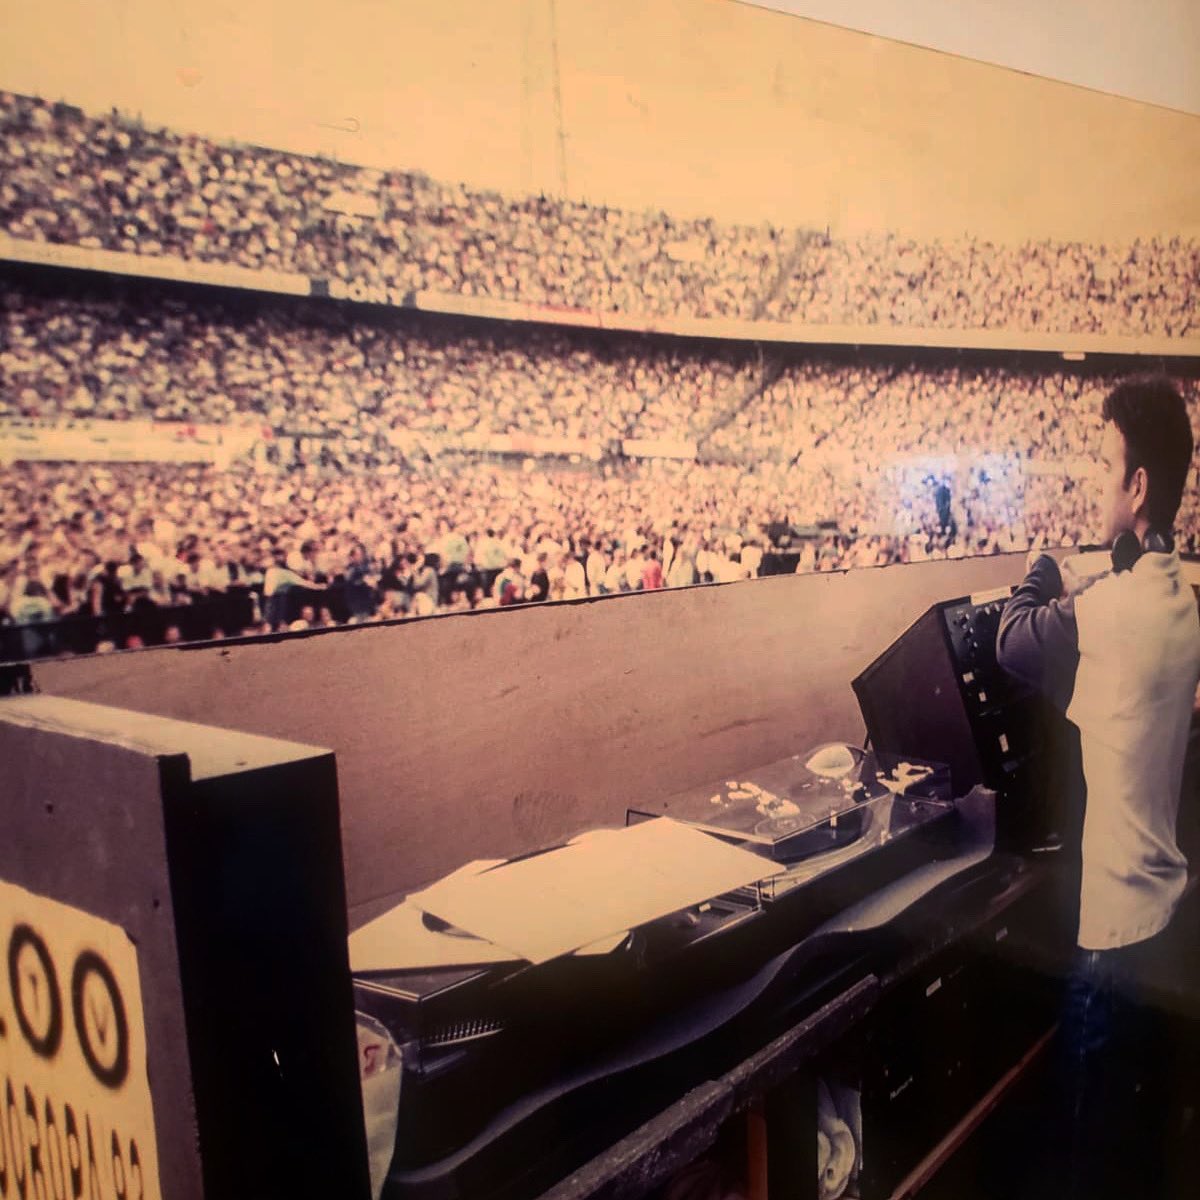 Paul Oakenfold Tbt To The First Time I Had The Privilege Of Playing To A Full Stadium Of People Was A Crazy Moment Sink Or Swim I Had No Intentions